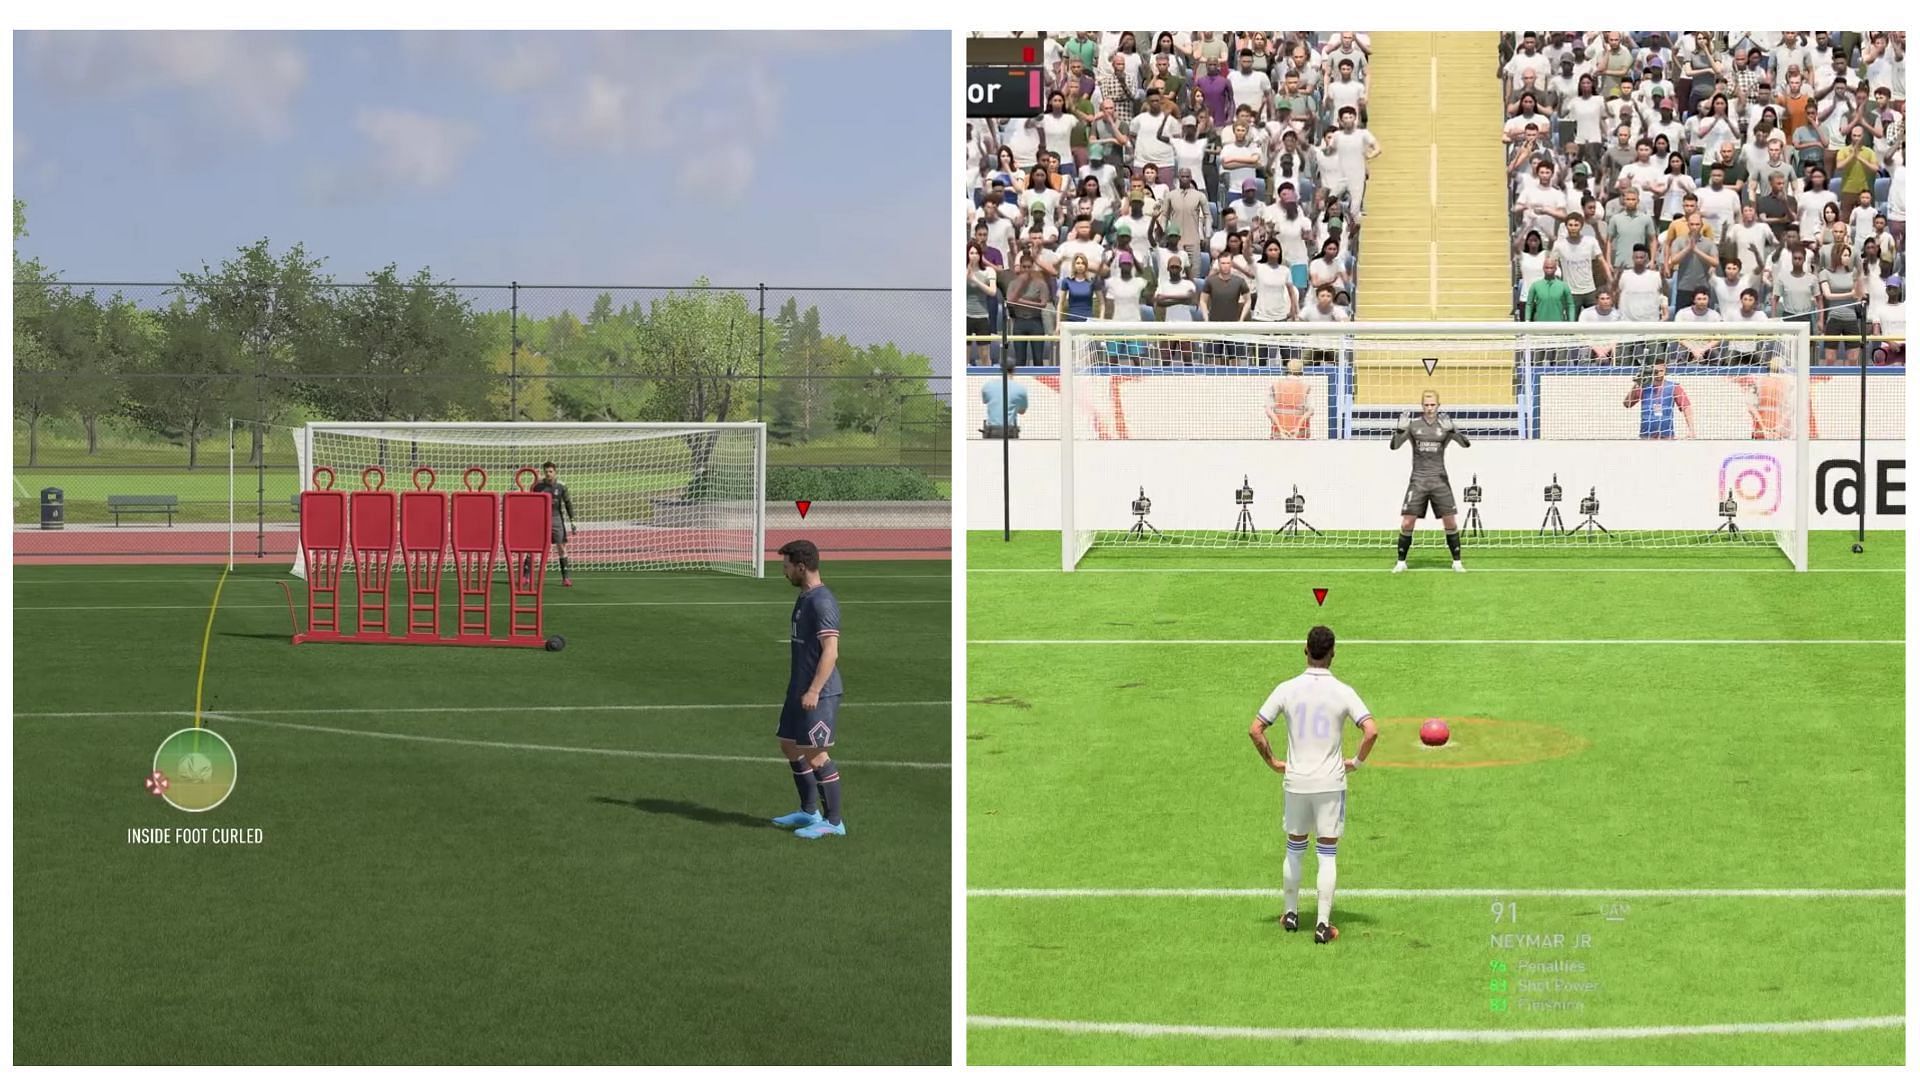 Freekicks and penalties have been completely overhauled in FIFA 23 (Images via The Guide- FIFA 23 Tutorials, Tips and Tricks))